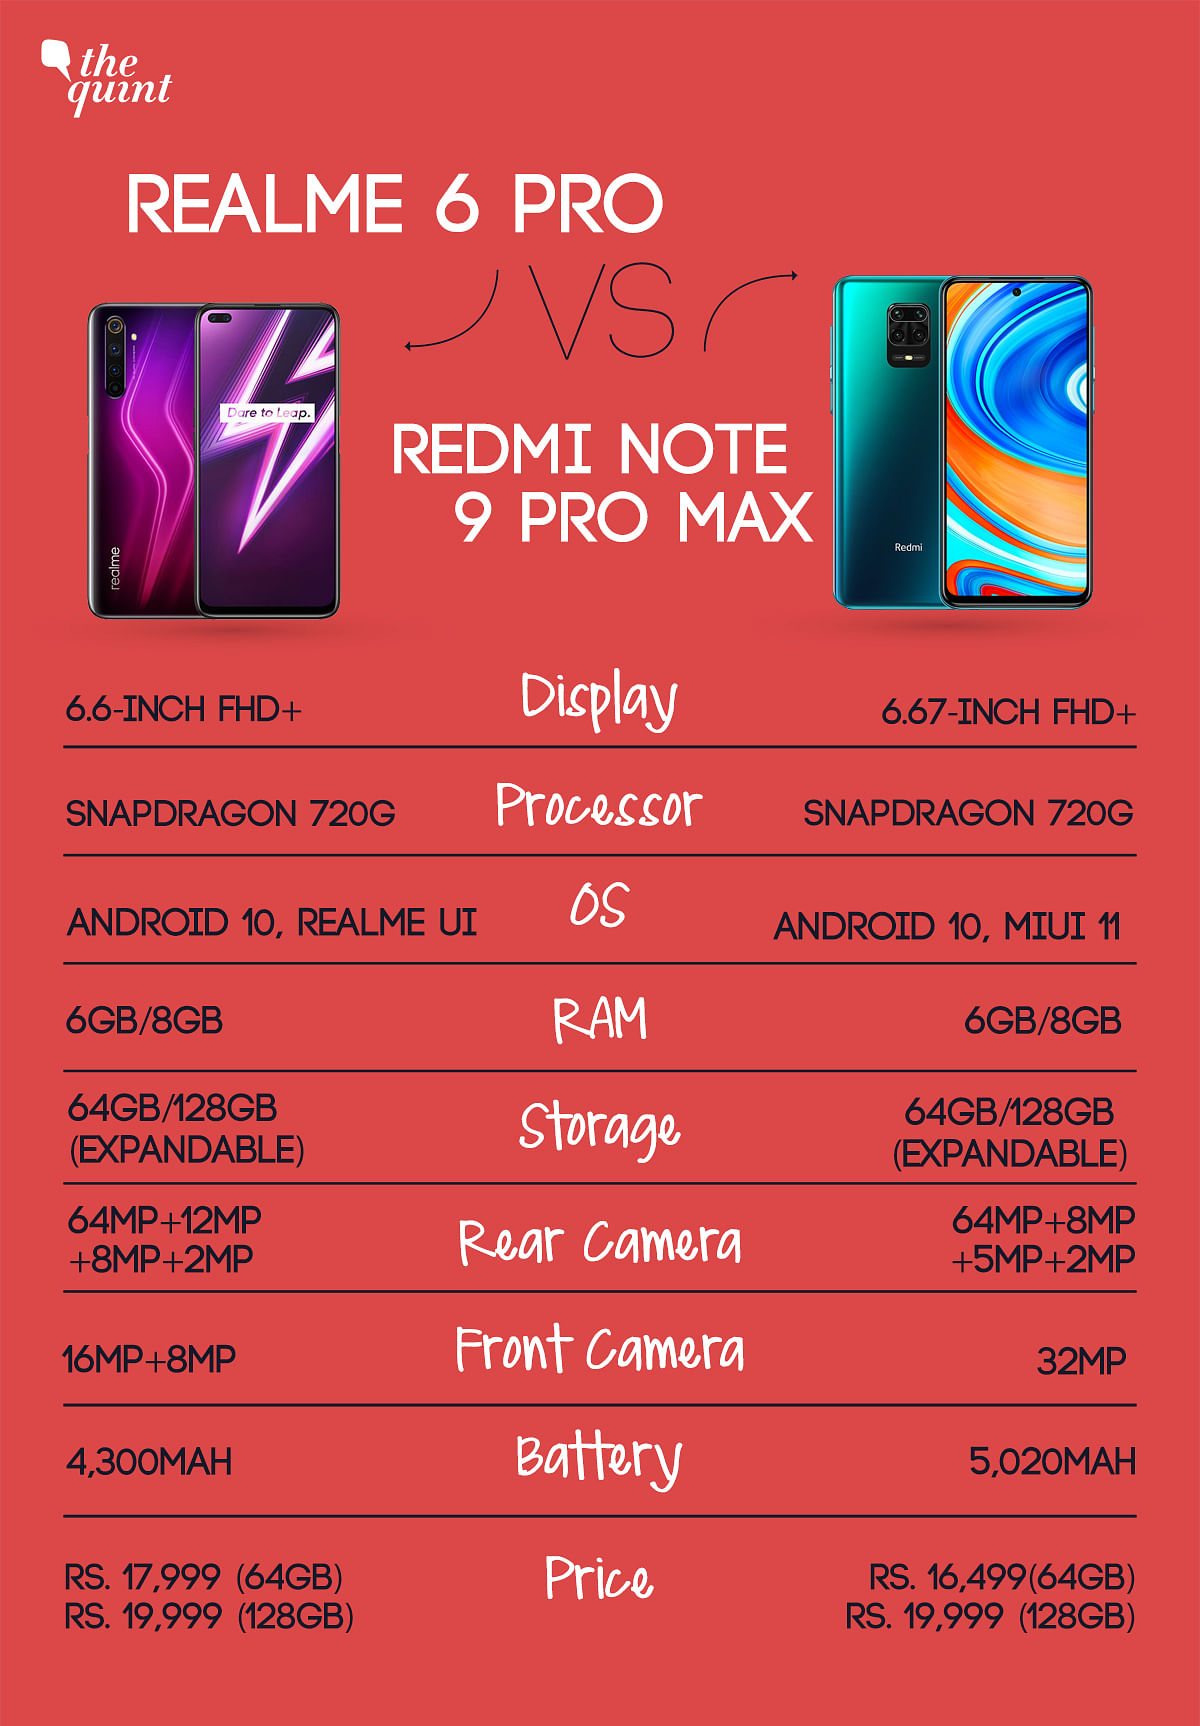 The Redmi Note 9 Pro Max comes with a bigger battery in this comparison.